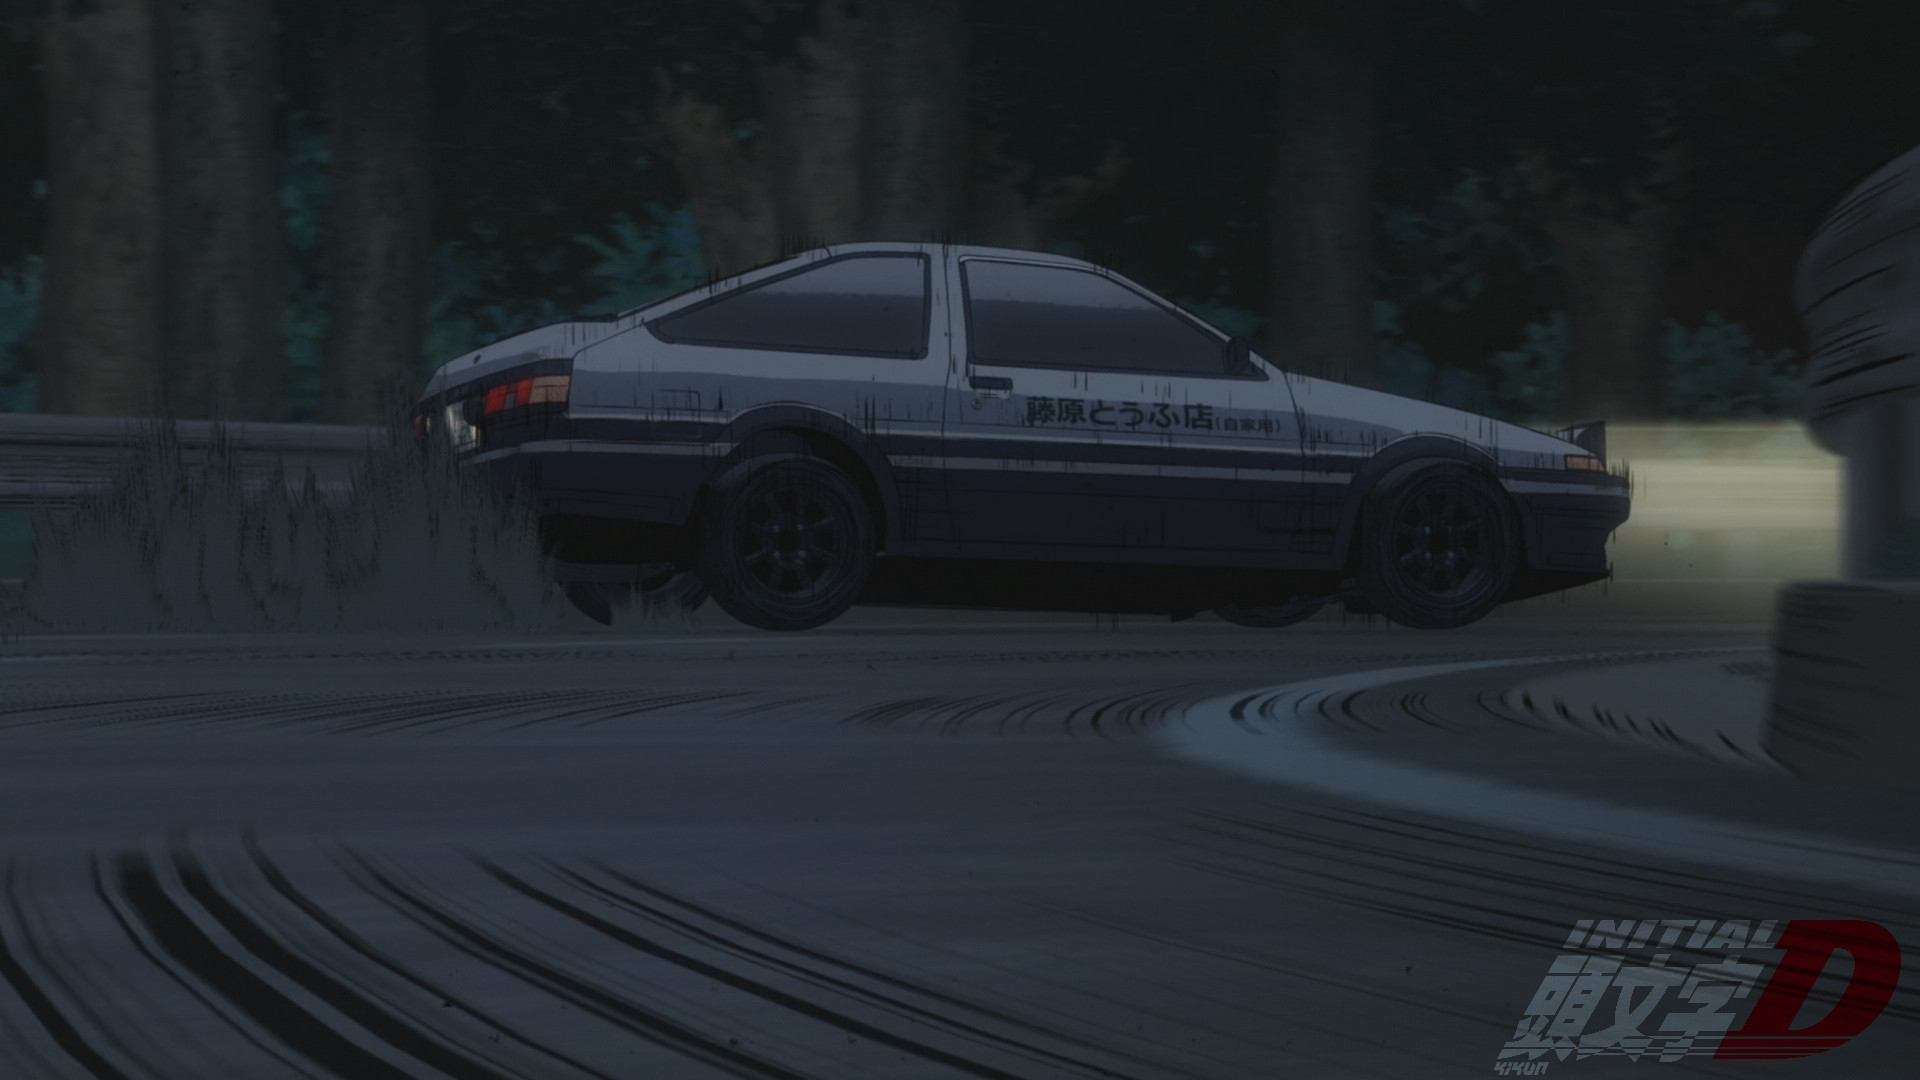 Wallpapers everywhere Even though it isnt strictly Initial D I was  inspired by it  rinitiald